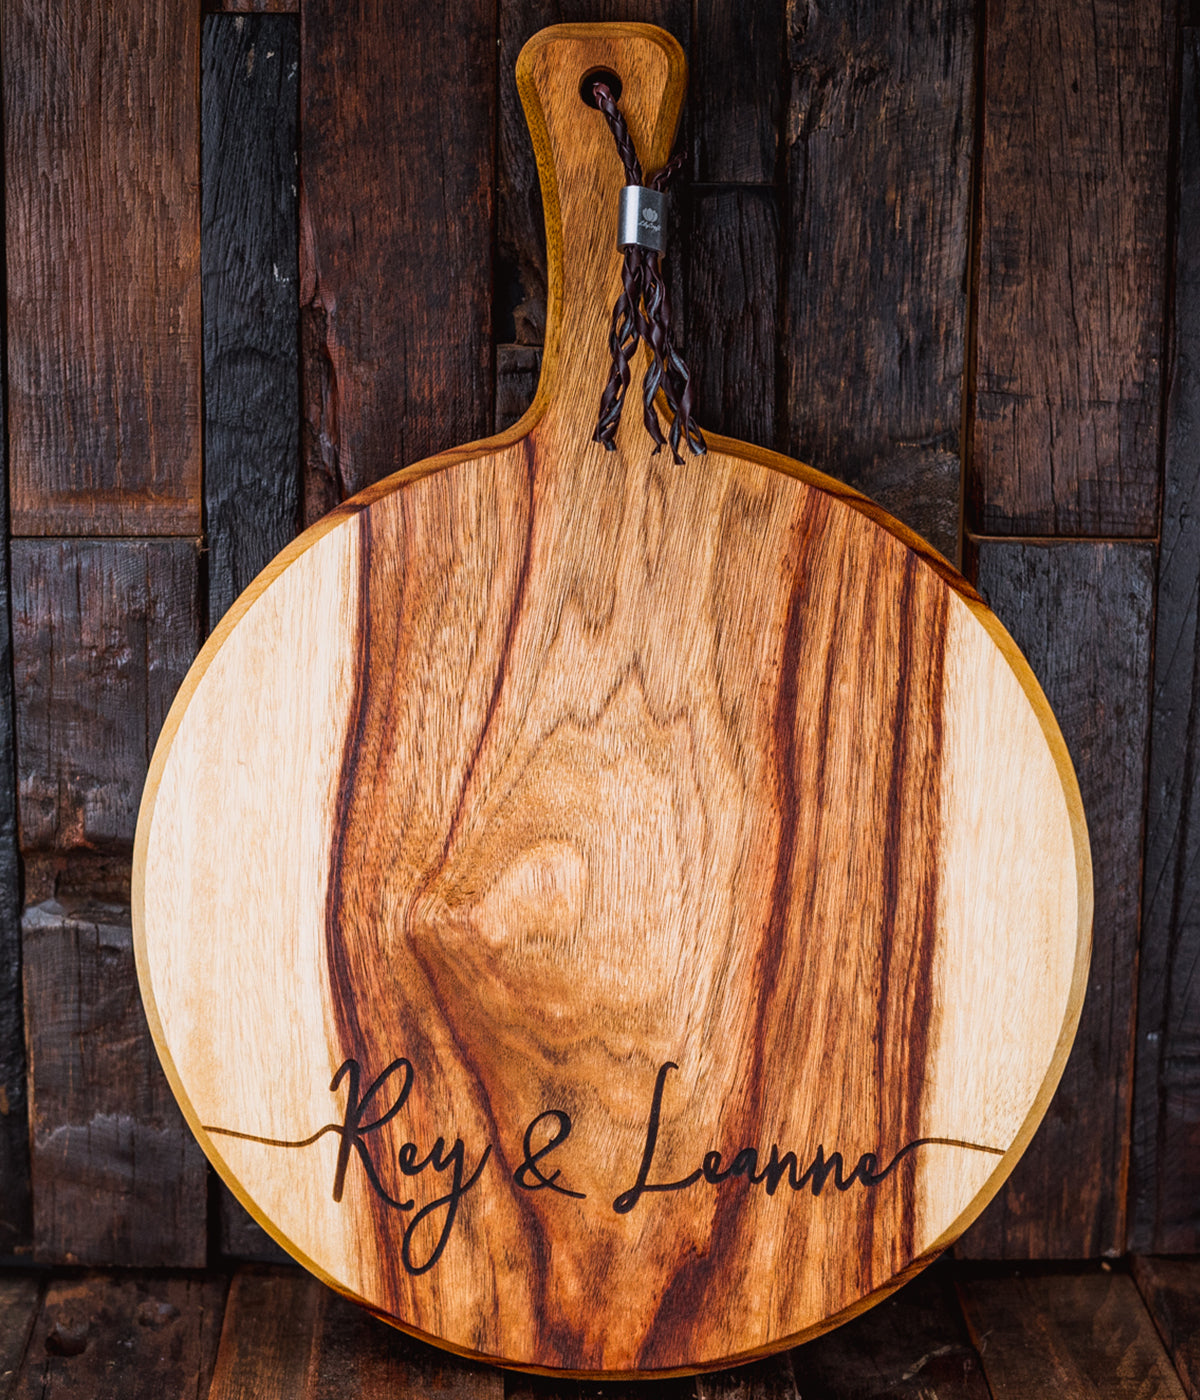 Personalised Cutting Boards made from Camphor wood LilyCraft Cheese Boards